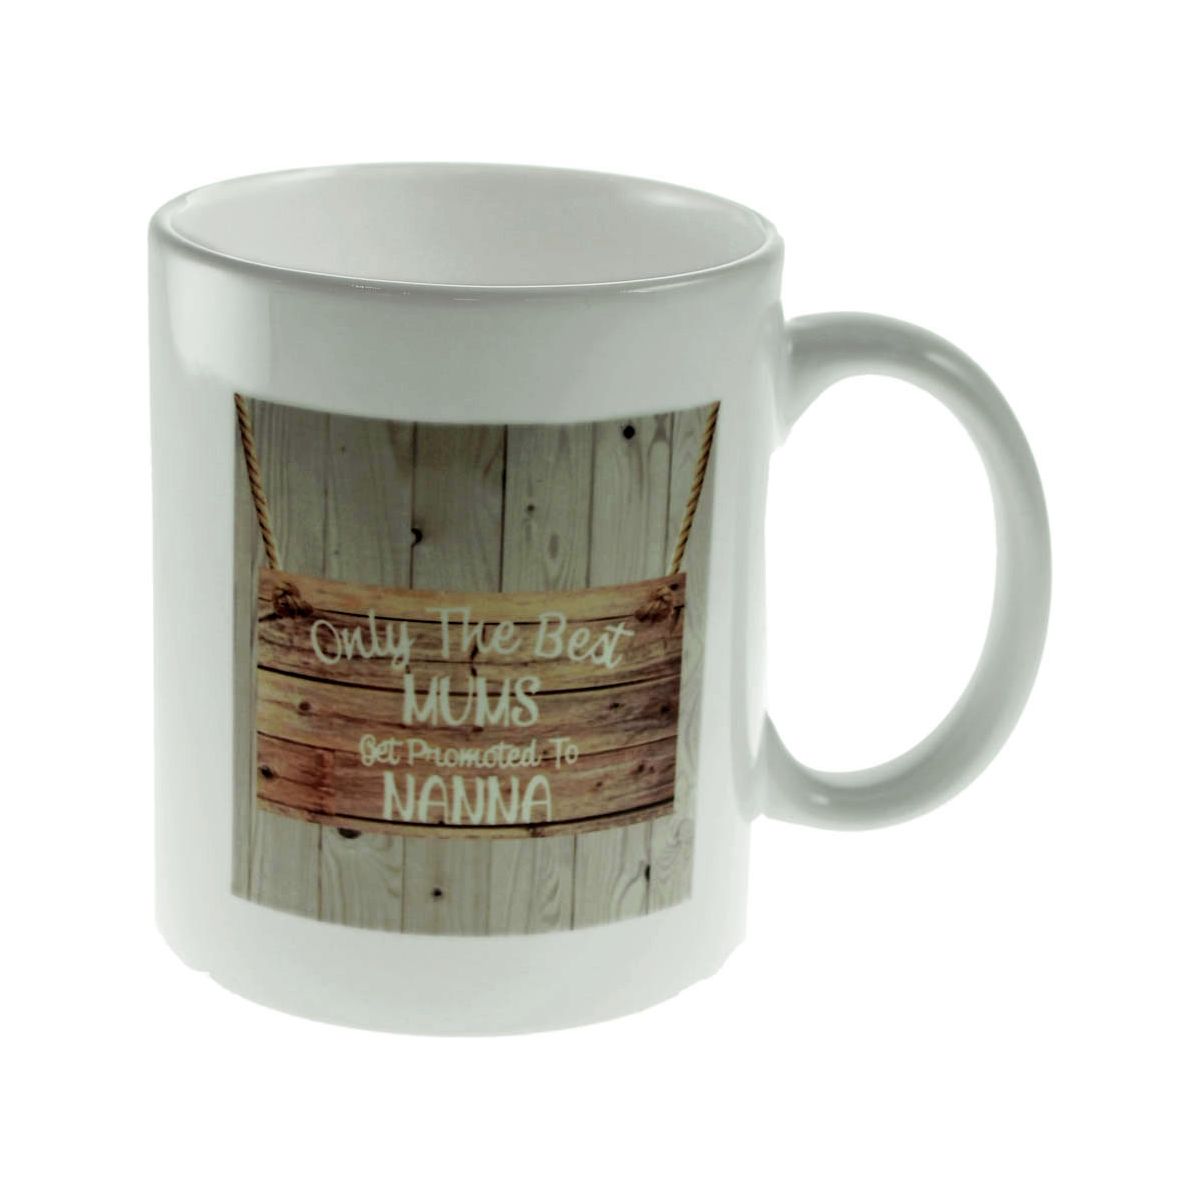 Wood Effect Design Only the Best Mums are Promoted to Nanny Mug - Ashton and Finch